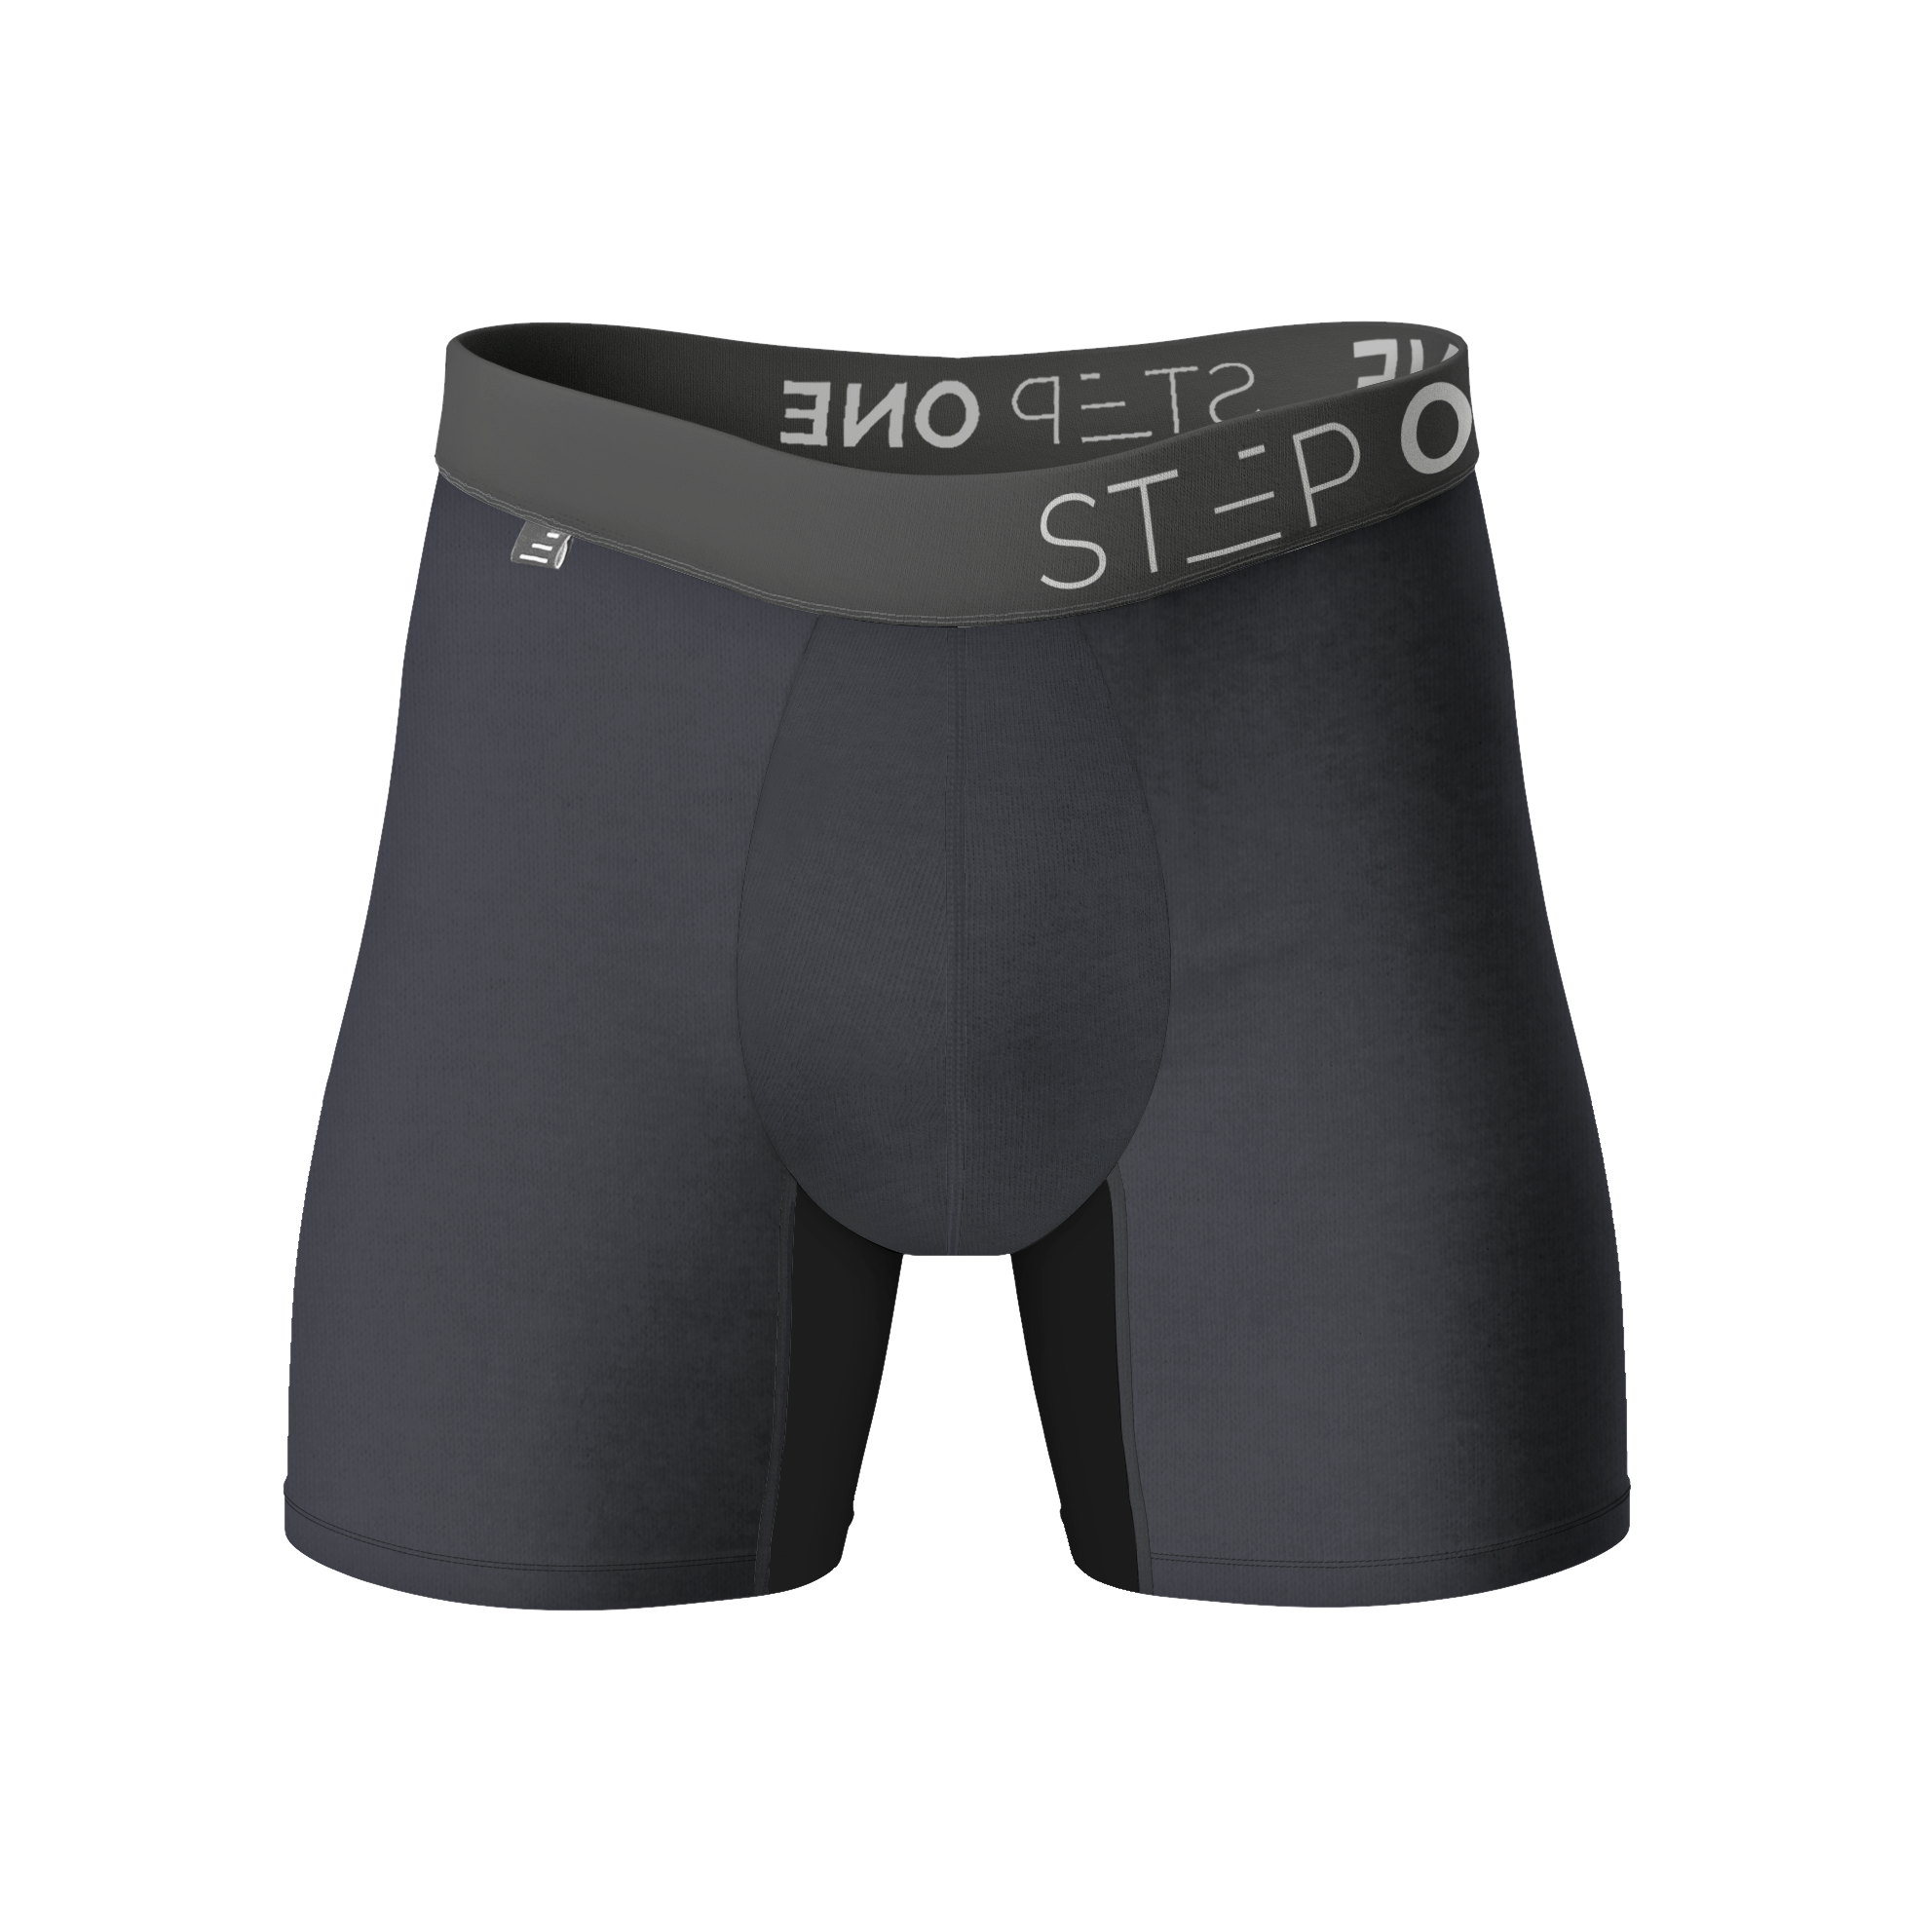 Daily Performance Boxer Brief in Black, Underwear for Work to Workouts, Myles